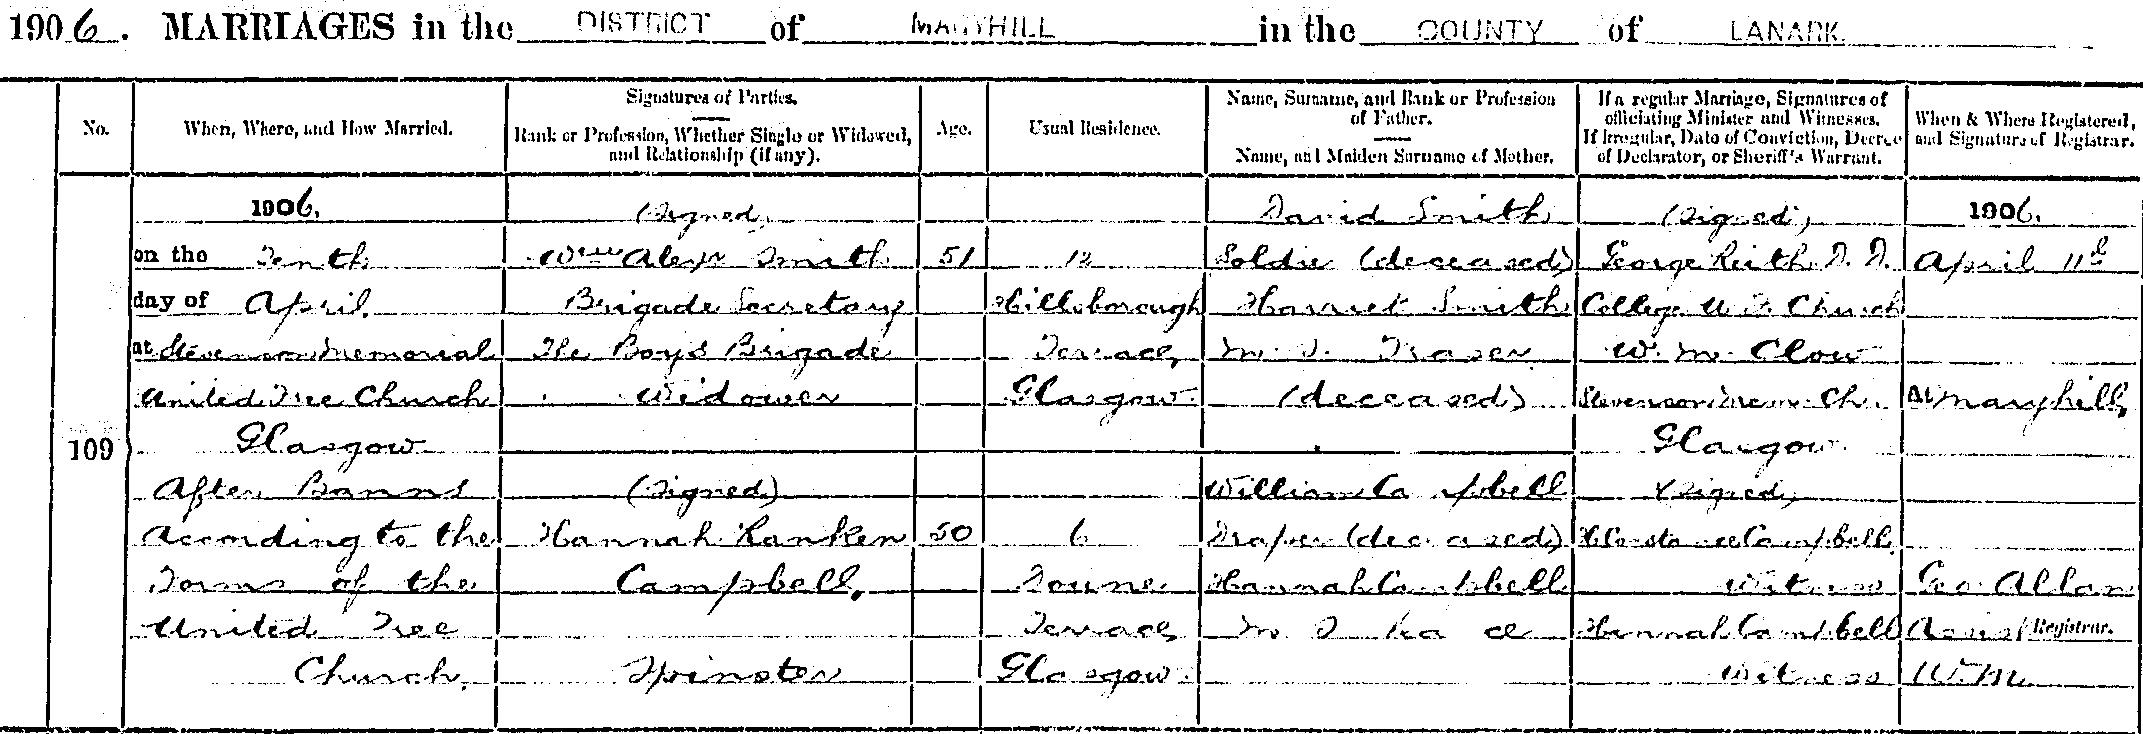 Marriage entry for William Alexander Smith - 1906